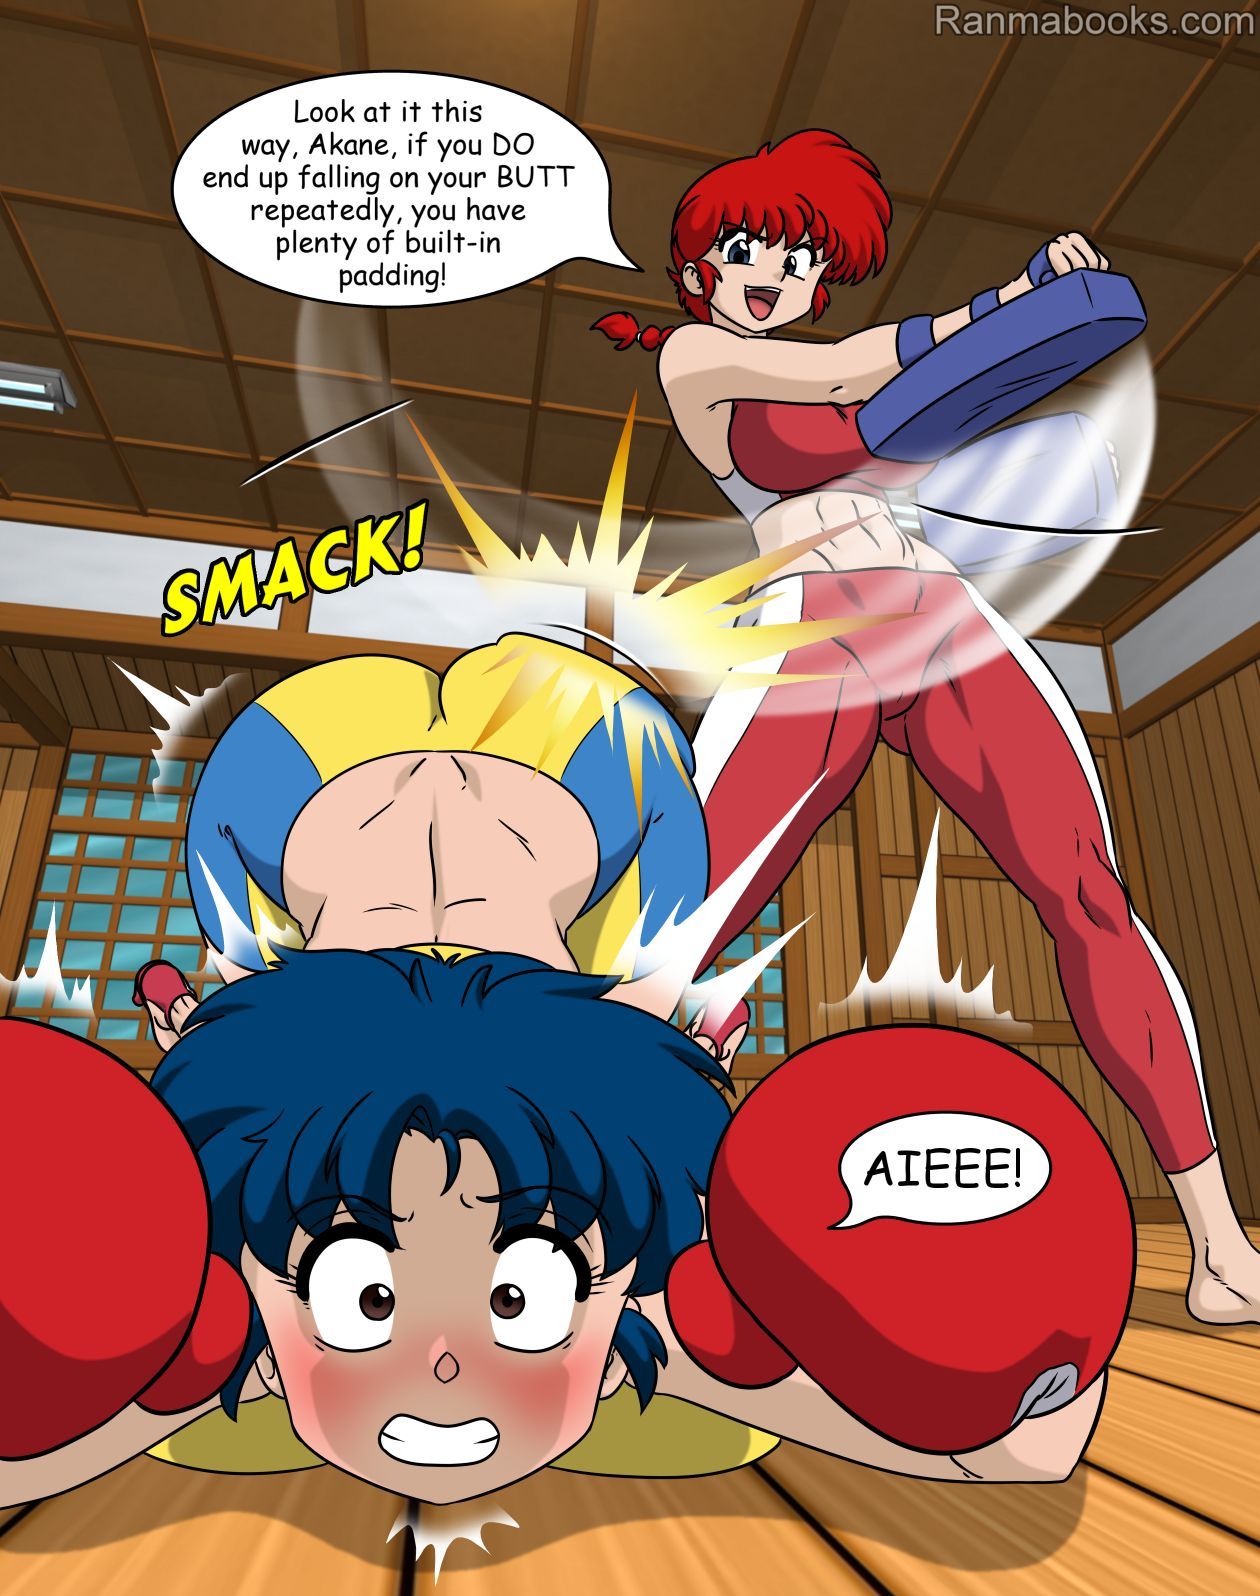 [Ranmabooks.com] New content from RHB! (Ranma 1/2) (Ongoing) 17